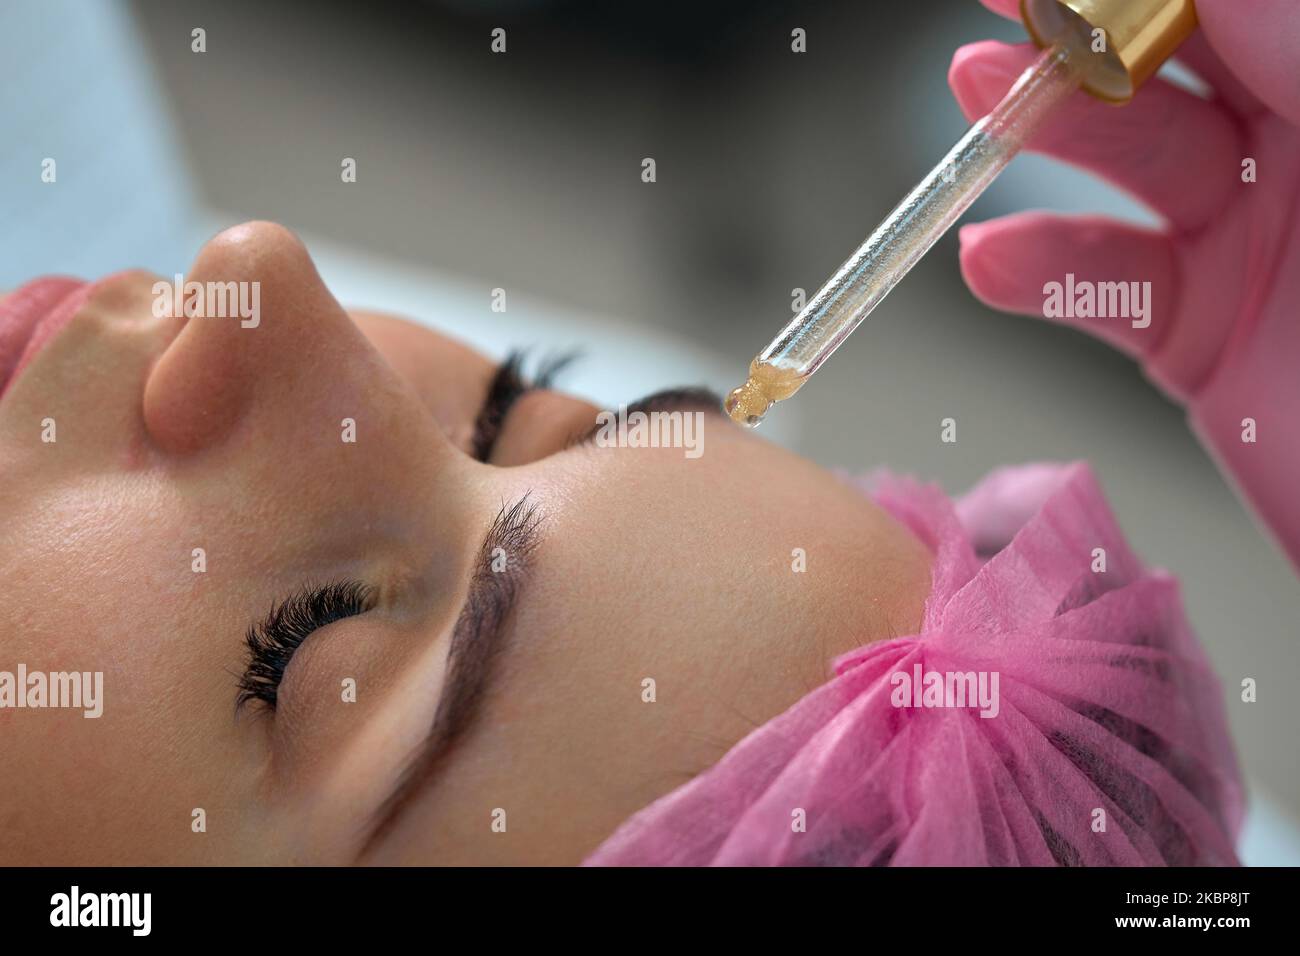 girl gets cosmetology services on her face Stock Photo